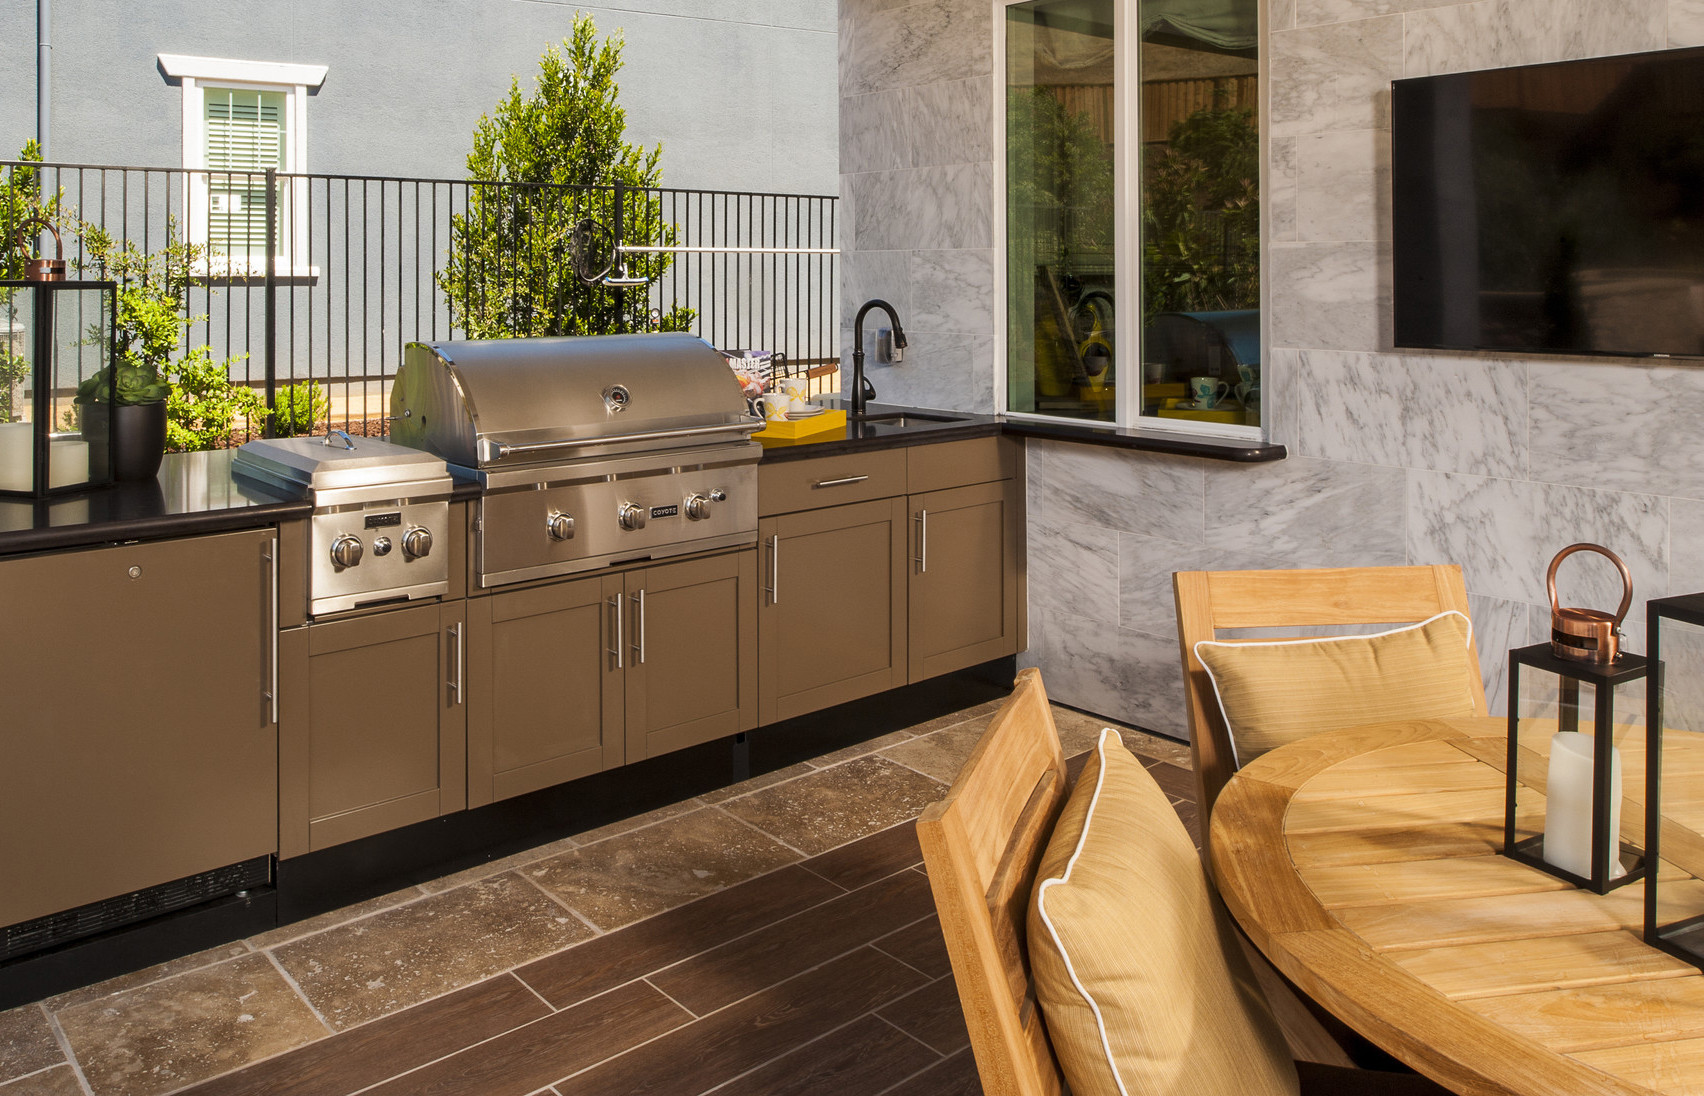 Danver Outdoor Kitchens
 Stainless Steel Base Cabinets for Outdoor Kitchens